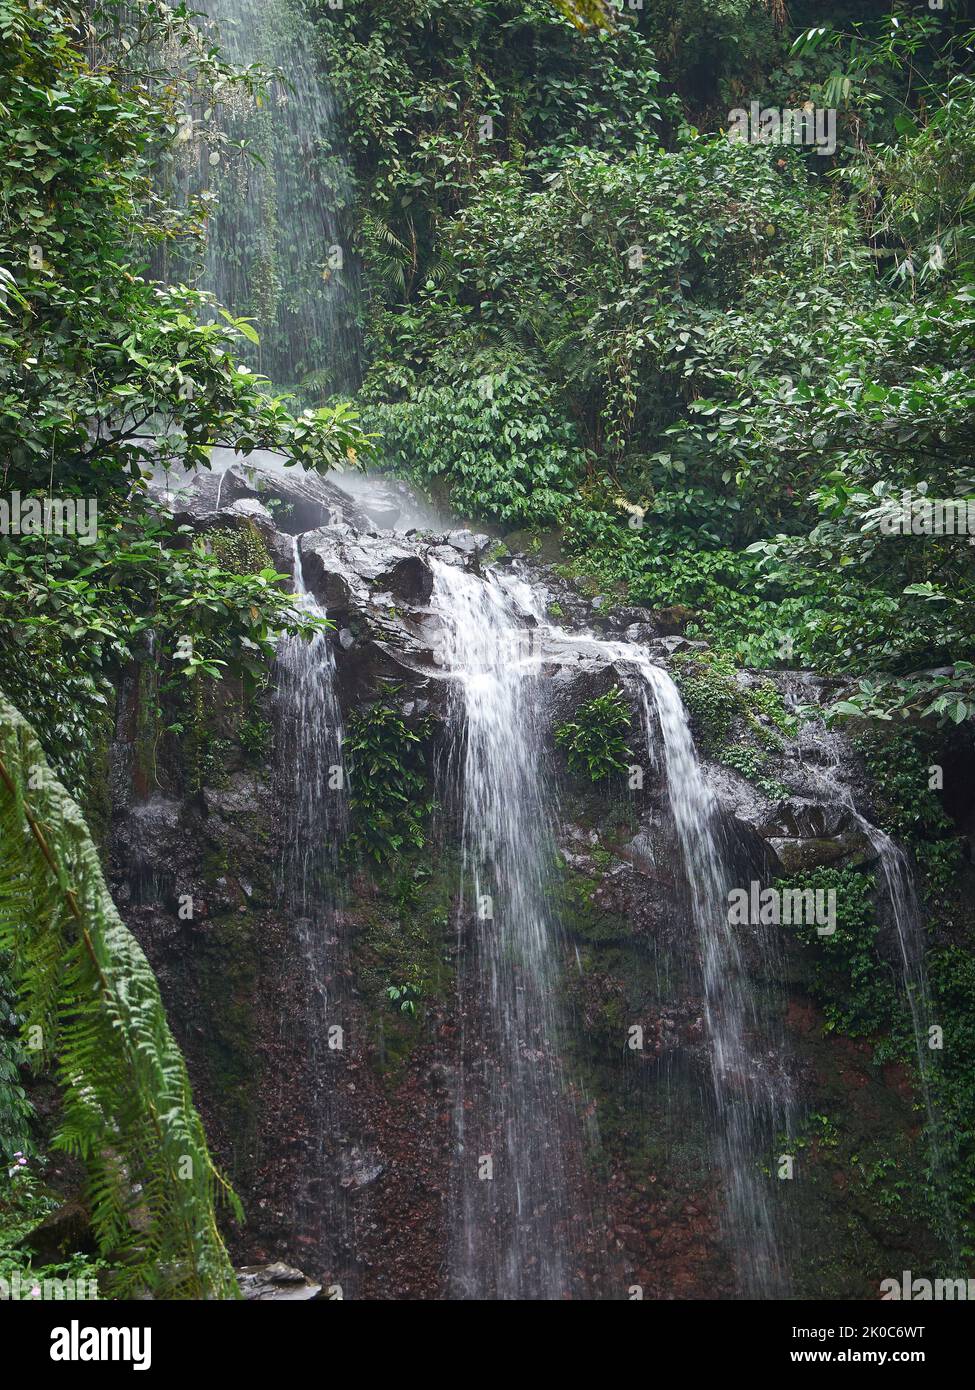 A small waterfall that flows between rocks in a tropical forest river in West Java, Indonesia Stock Photo